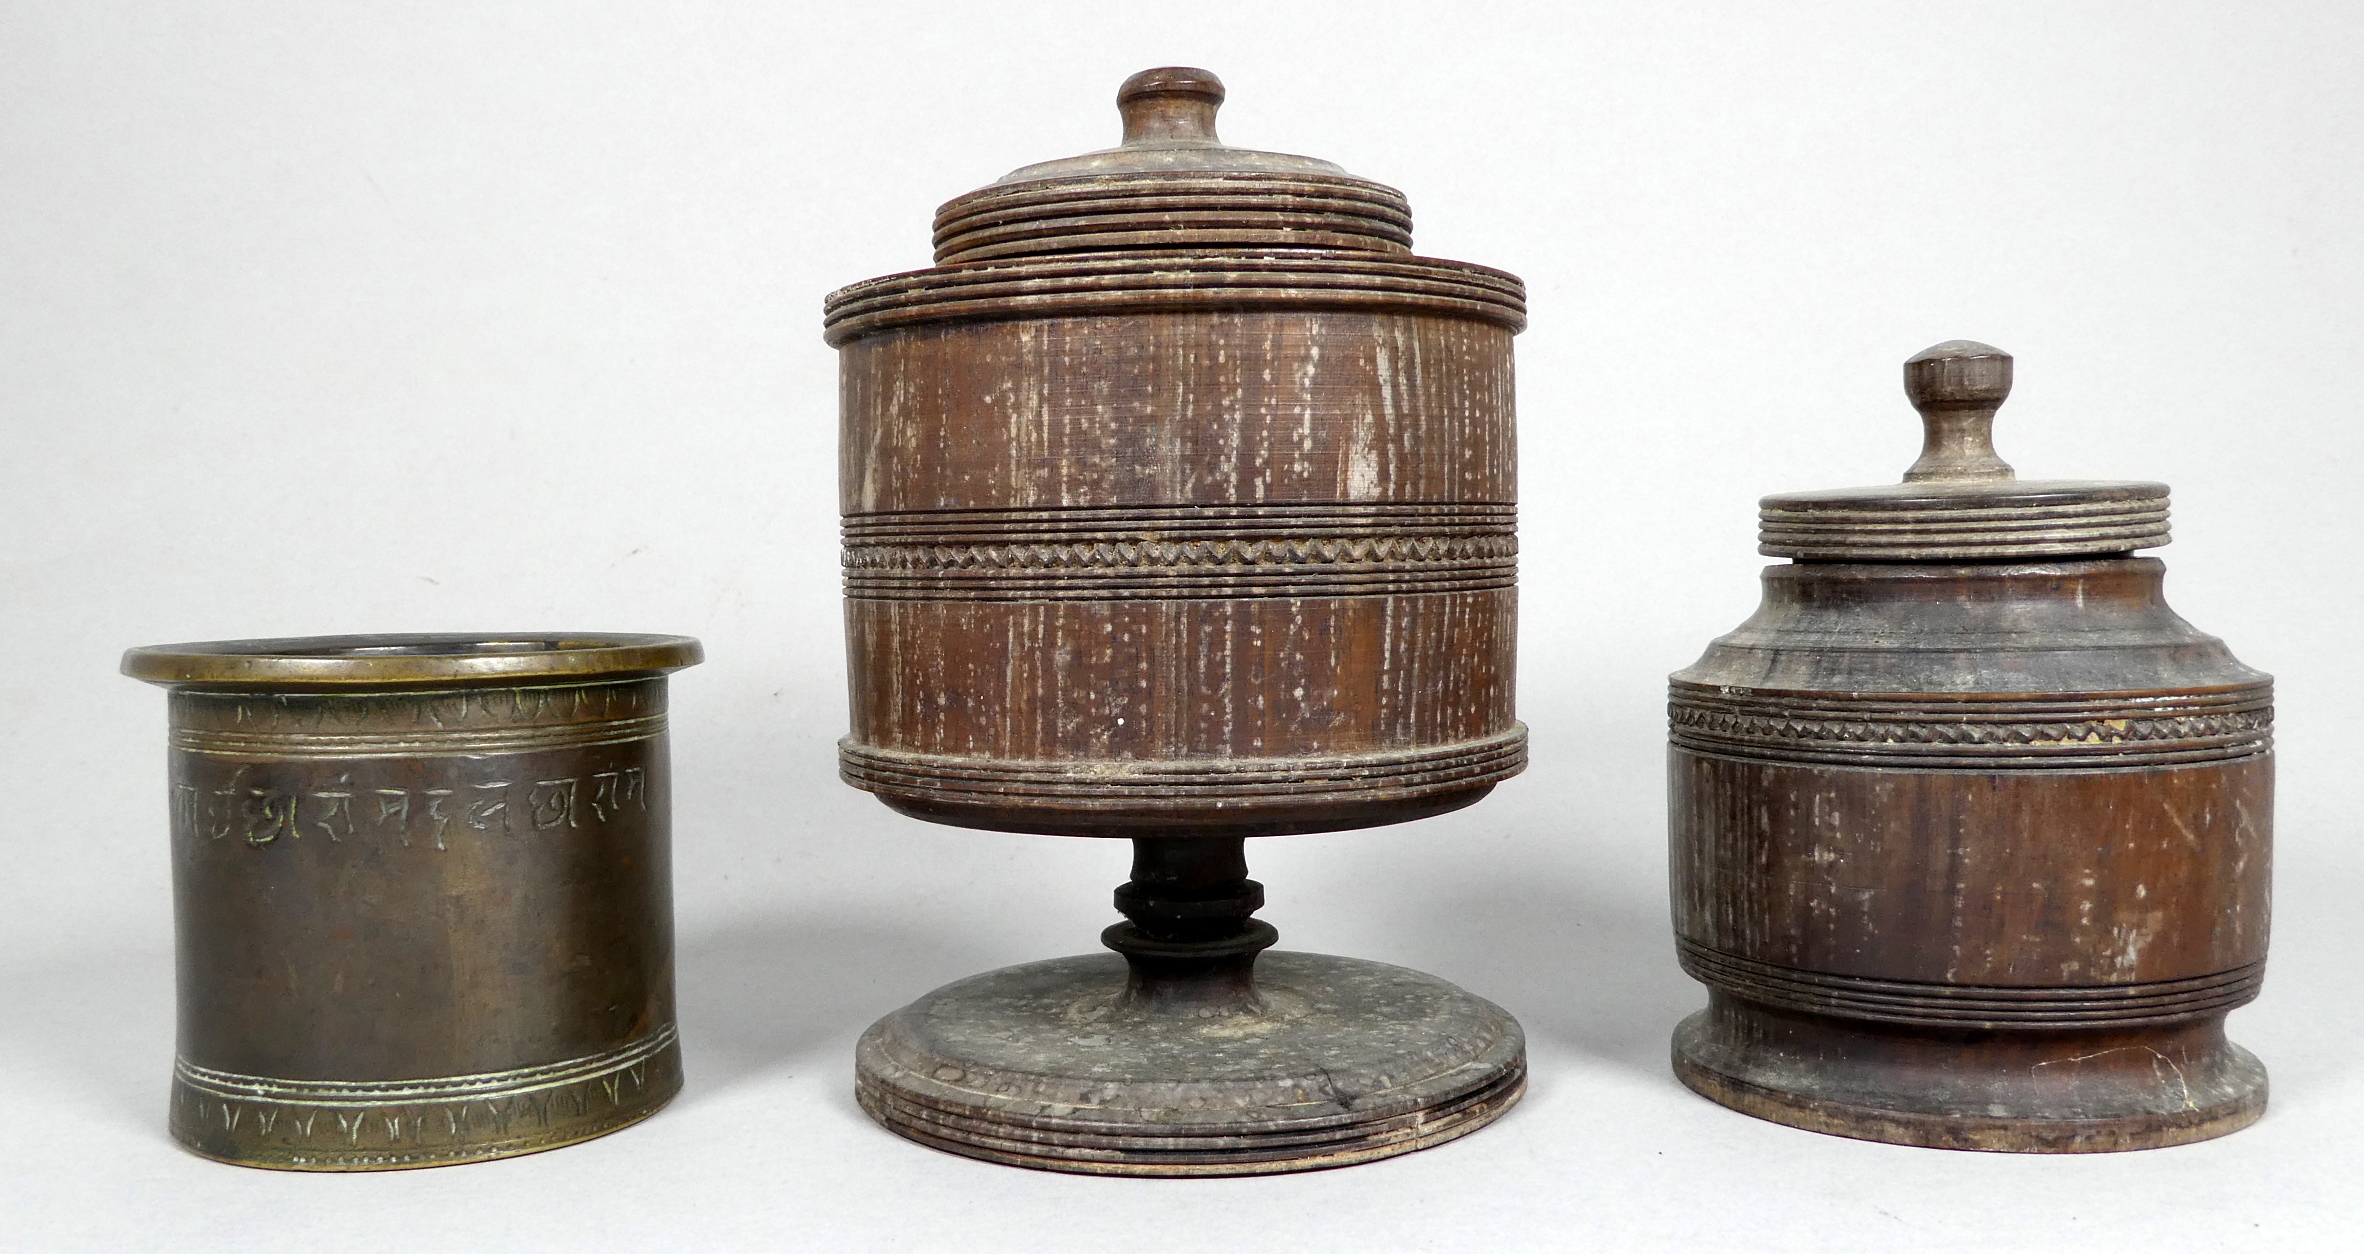 A 19th century bronze measure - engraved with palmettes, height 7cm, together with two treen jars